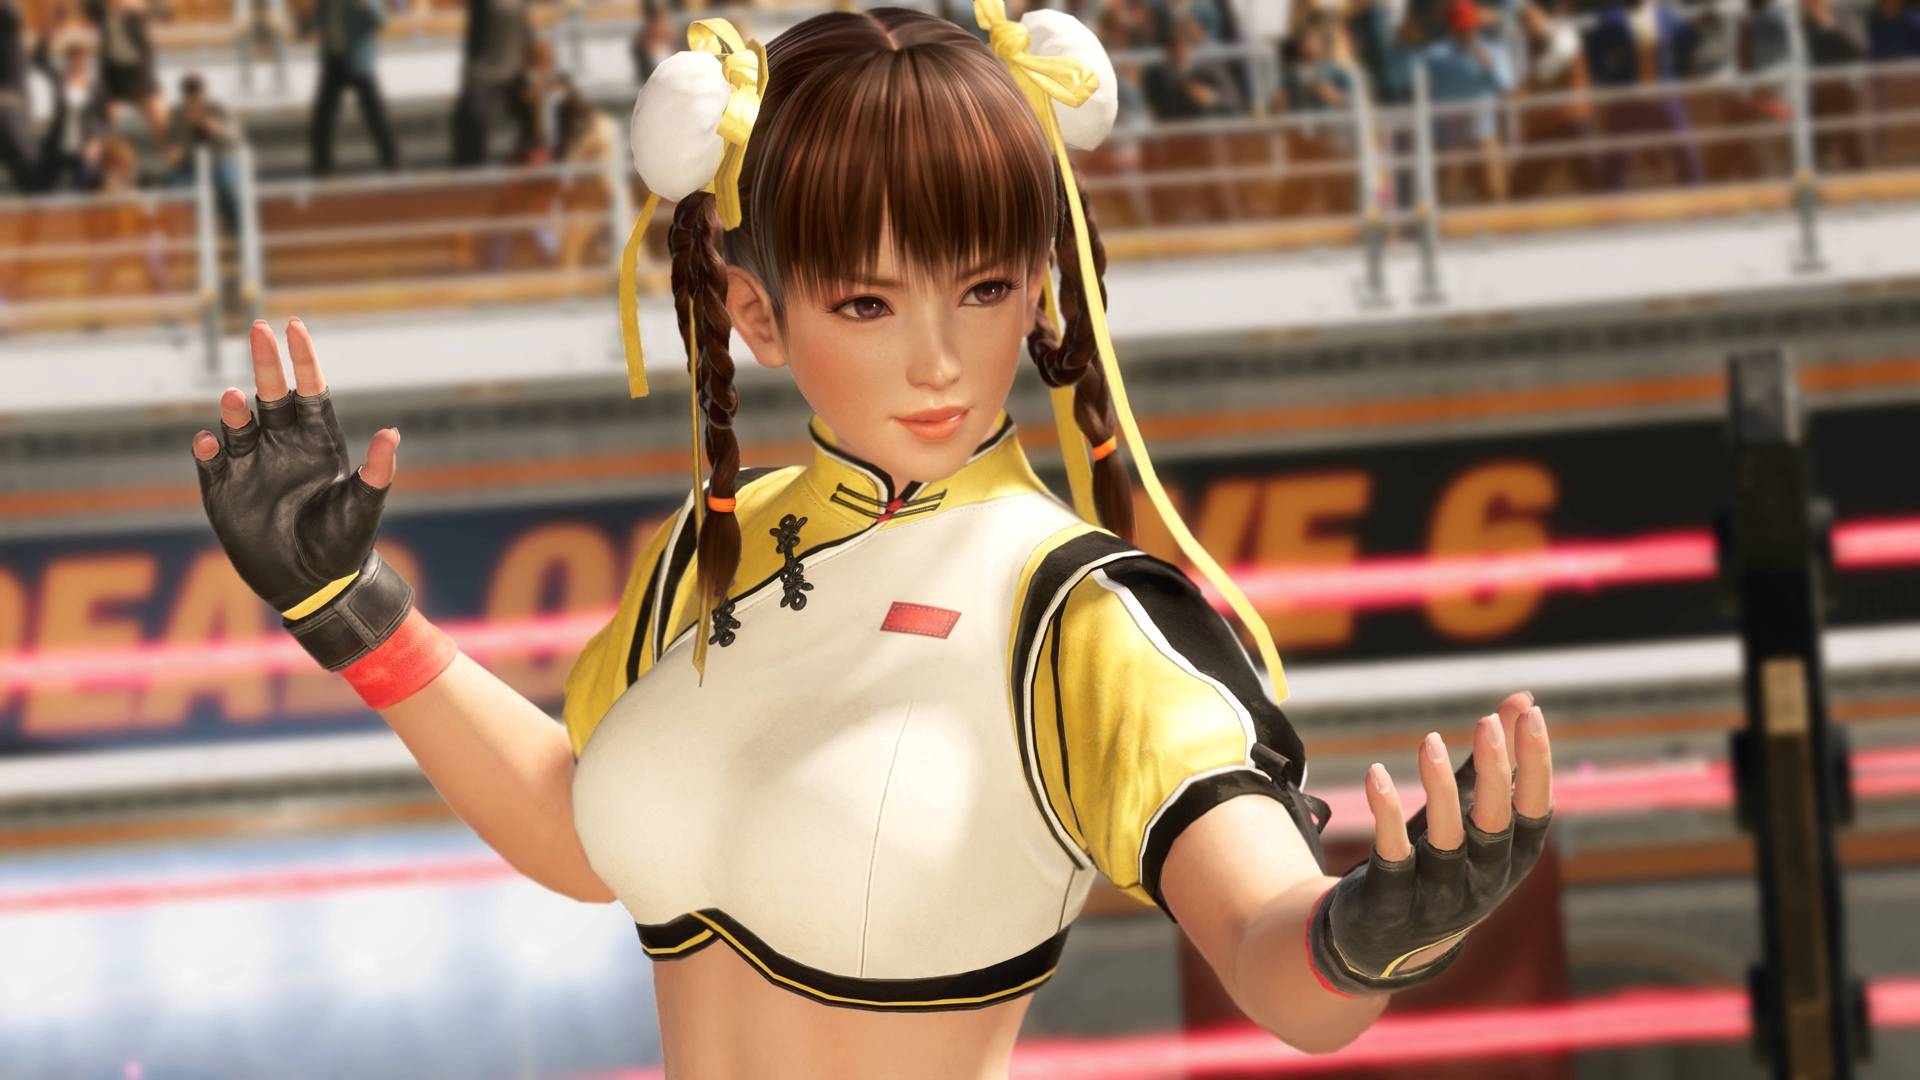 Dead or Alive 6: Deluxe demo available today